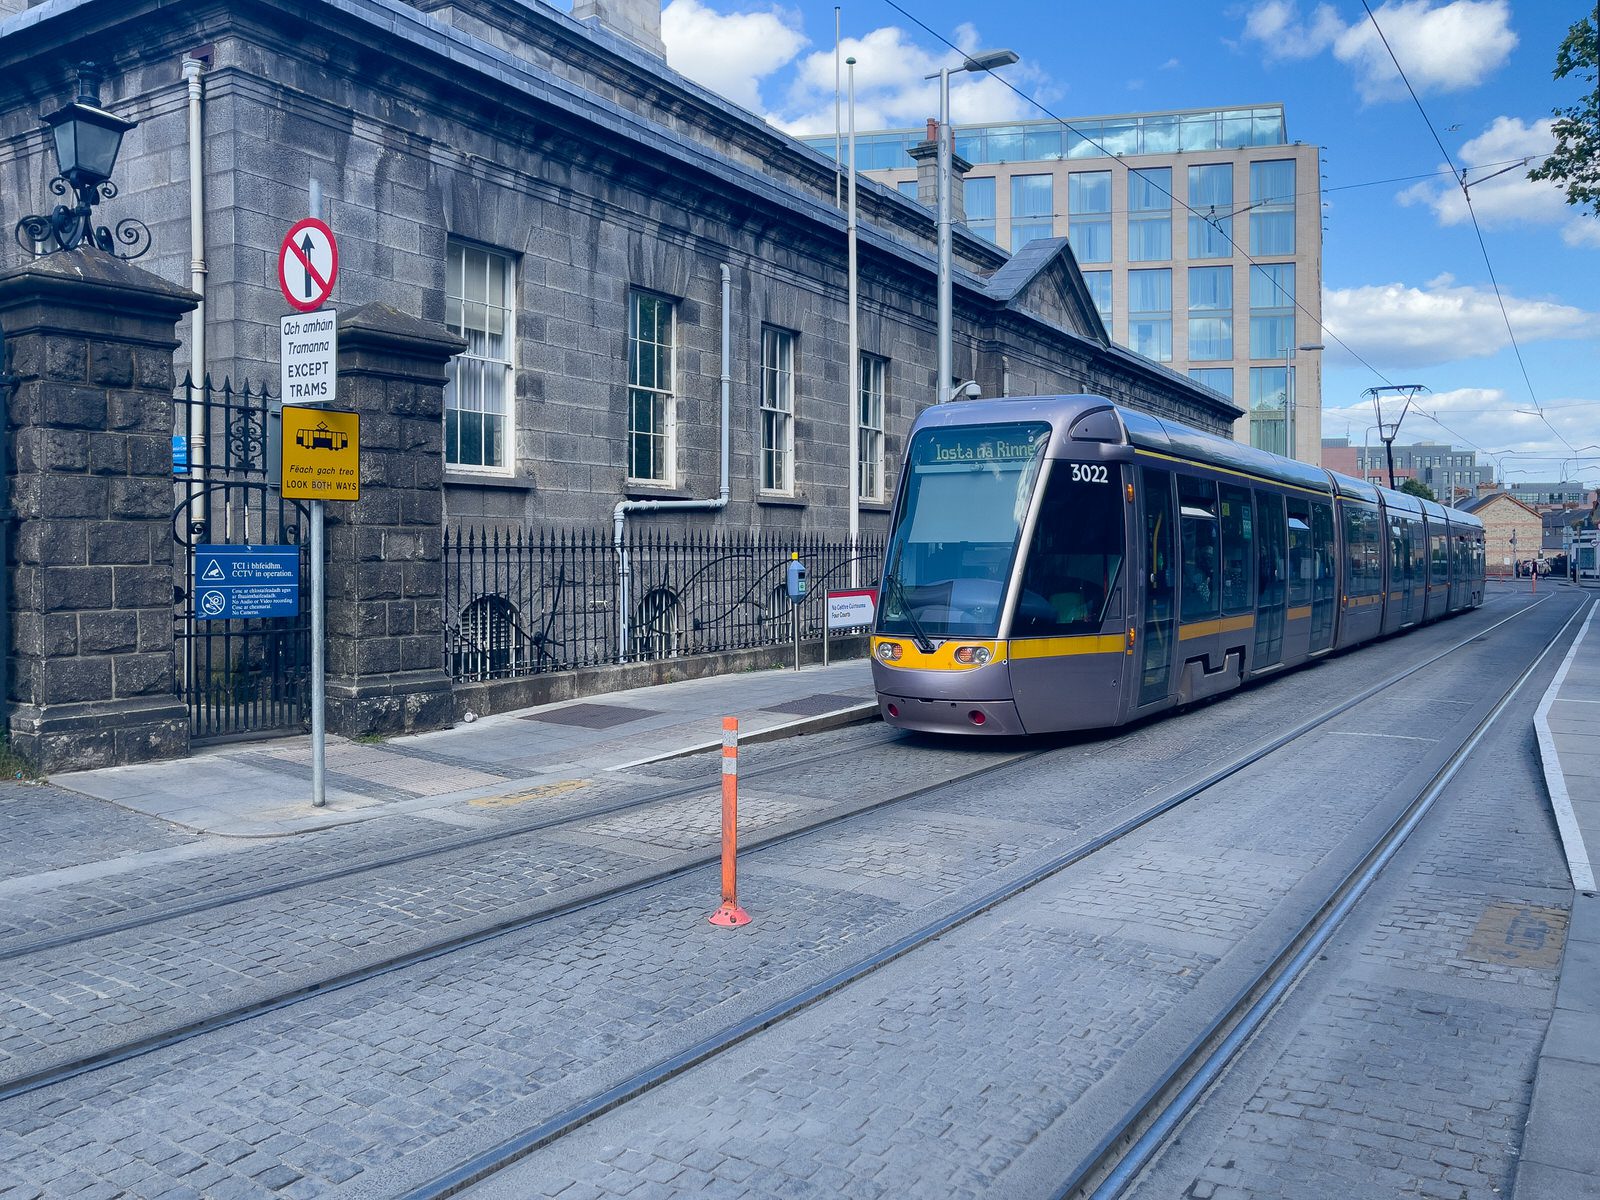 THE LUAS FOUR COURTS TRAM STOP [THERE IS MUCH TO BE SEEN HERE]-234117-1